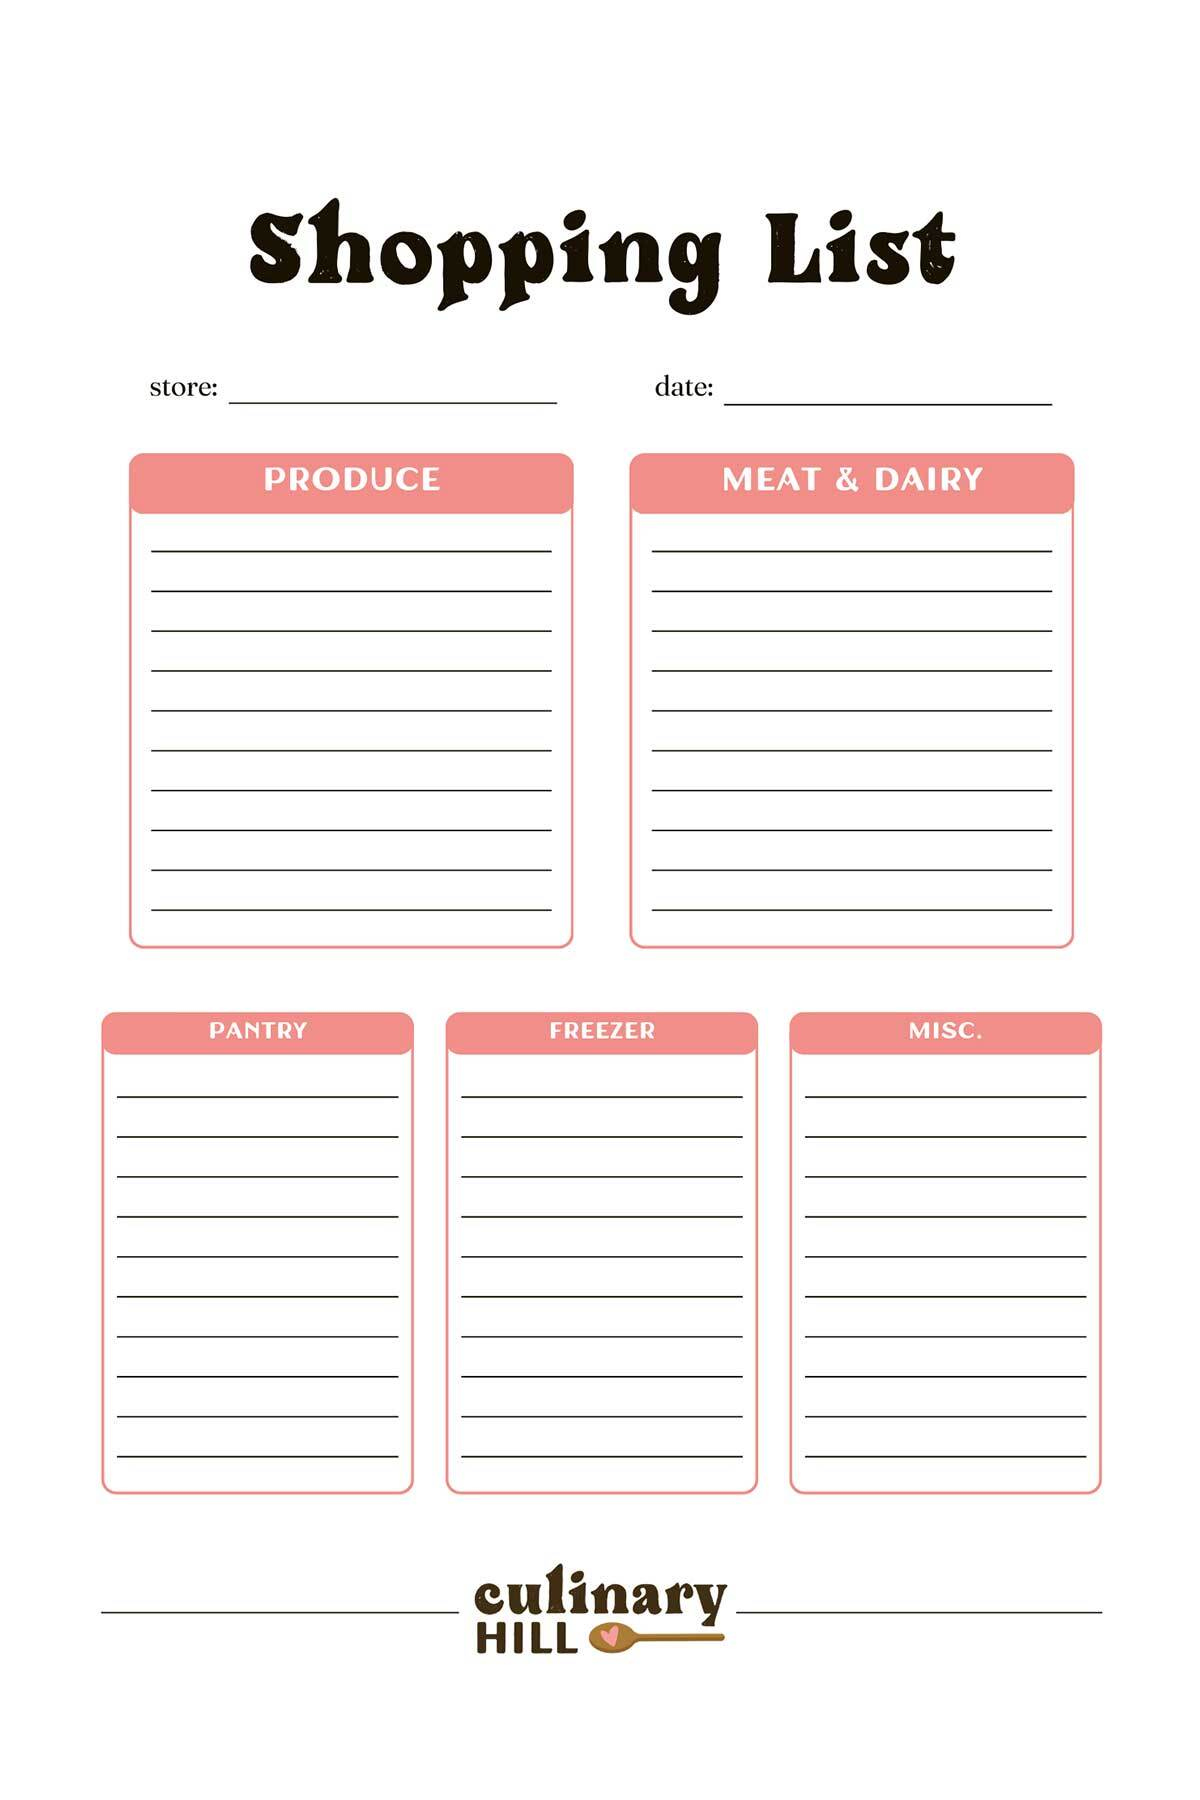 Shopping List Template - Culinary Hill intended for Free Printable Grocery List